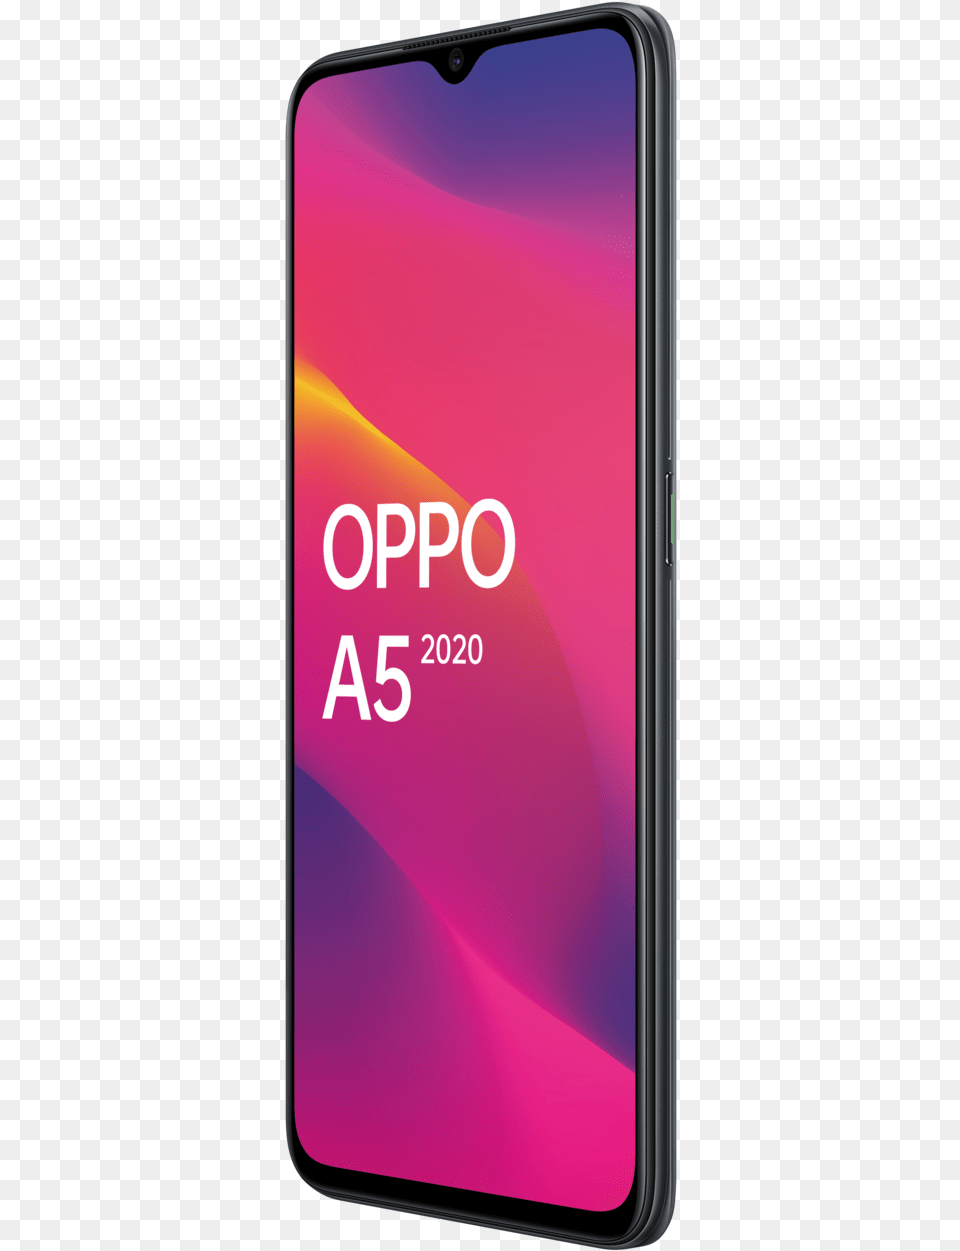 Oppo A5 2020 Smartphone Smartphone, Electronics, Mobile Phone, Phone Free Transparent Png